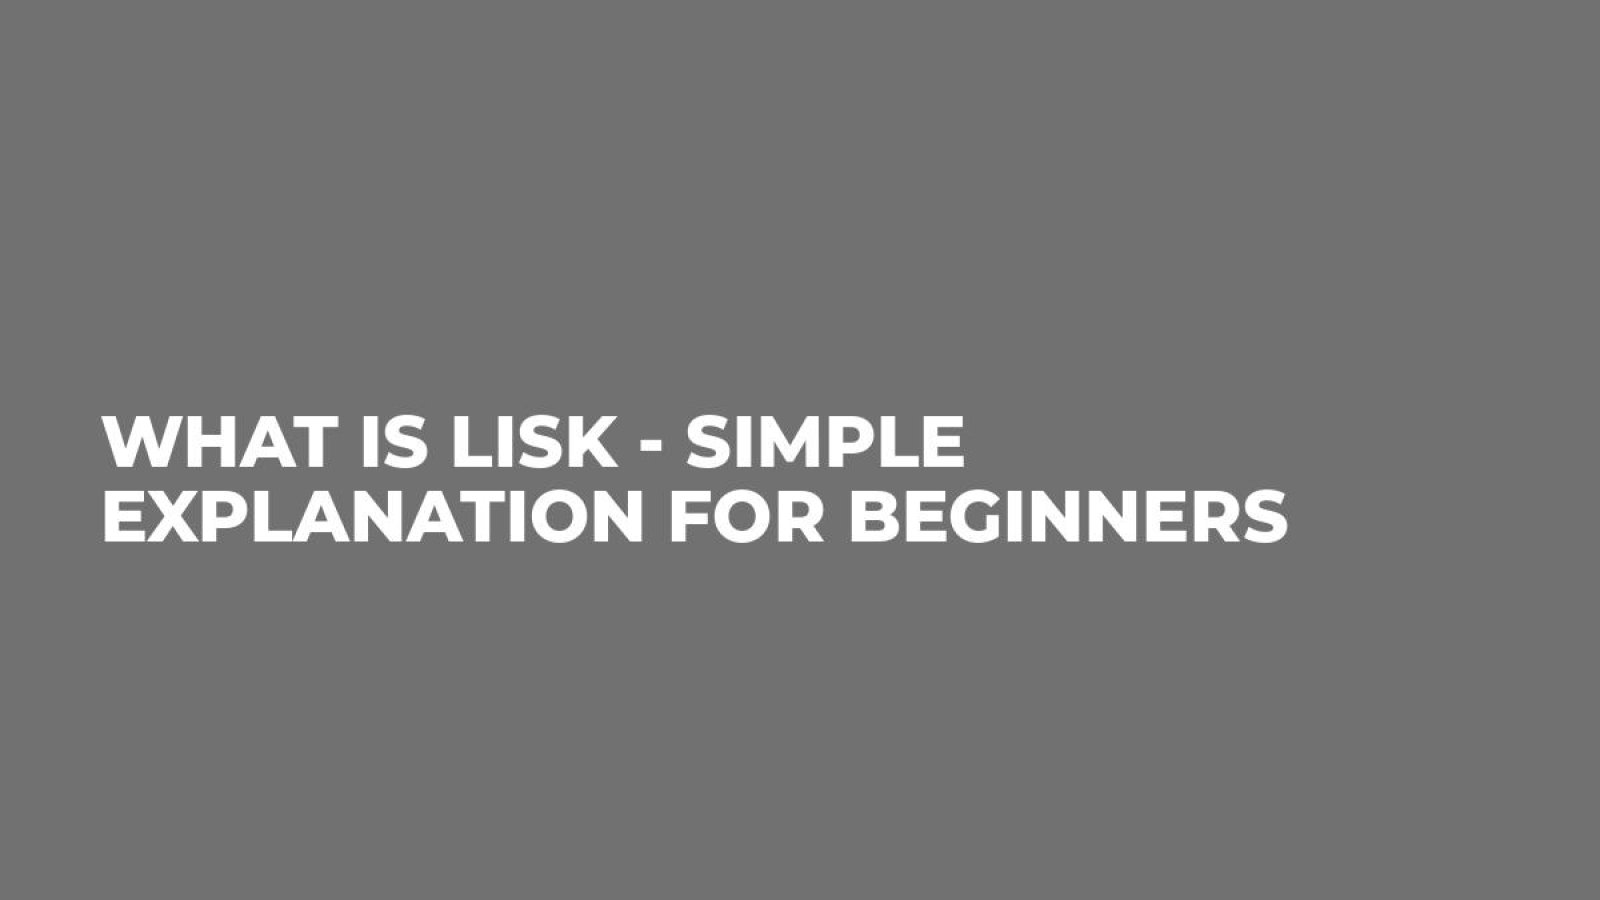 What is Lisk - Simple Explanation for Beginners